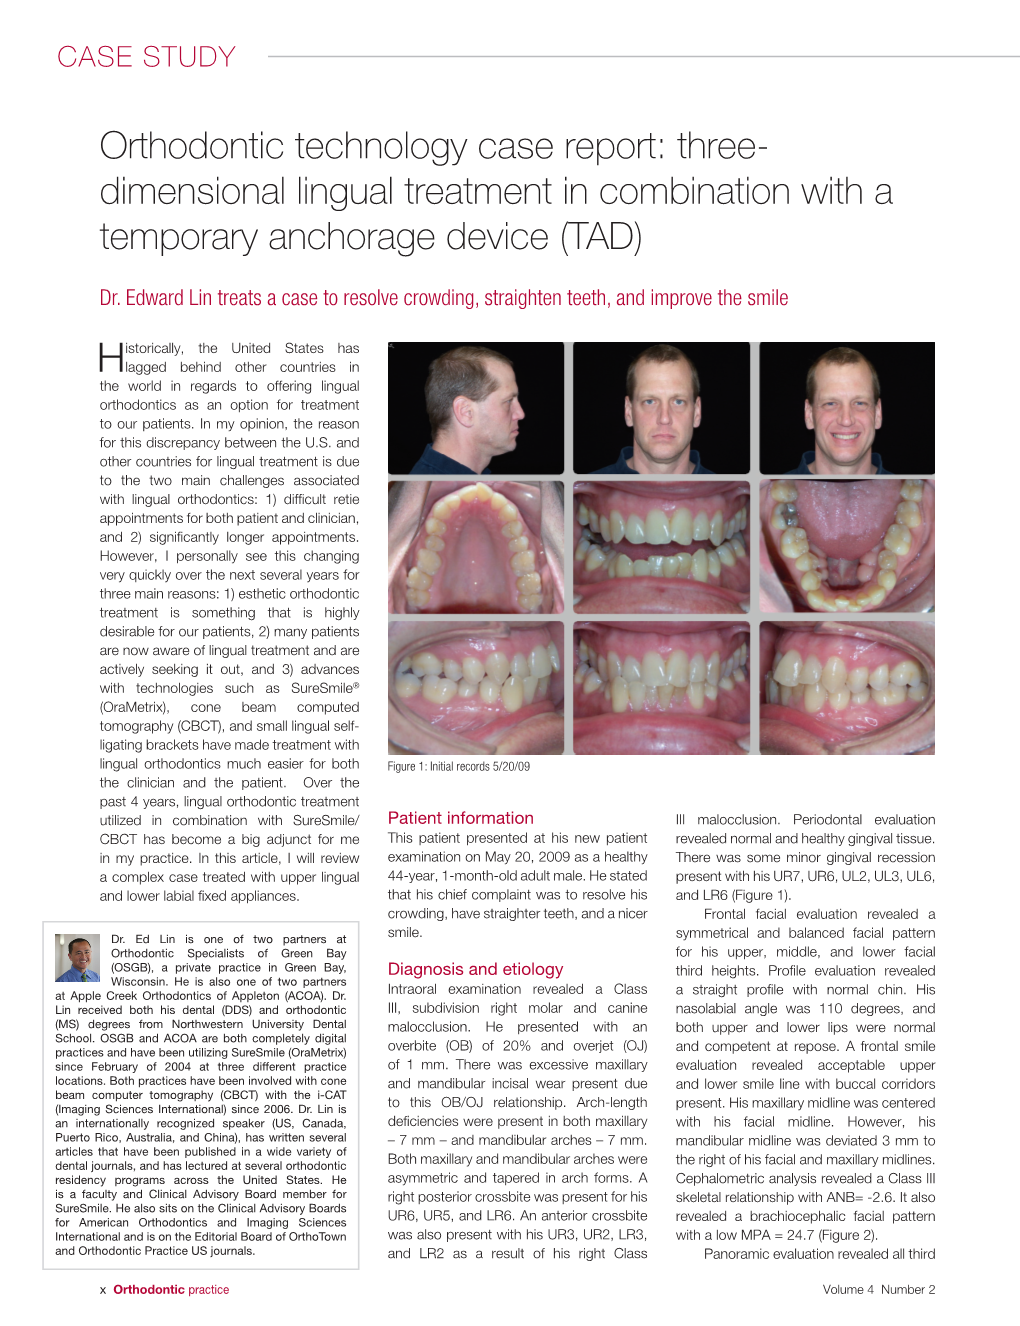 3D Lingual Treatment with Suresmile and Tads Case Report